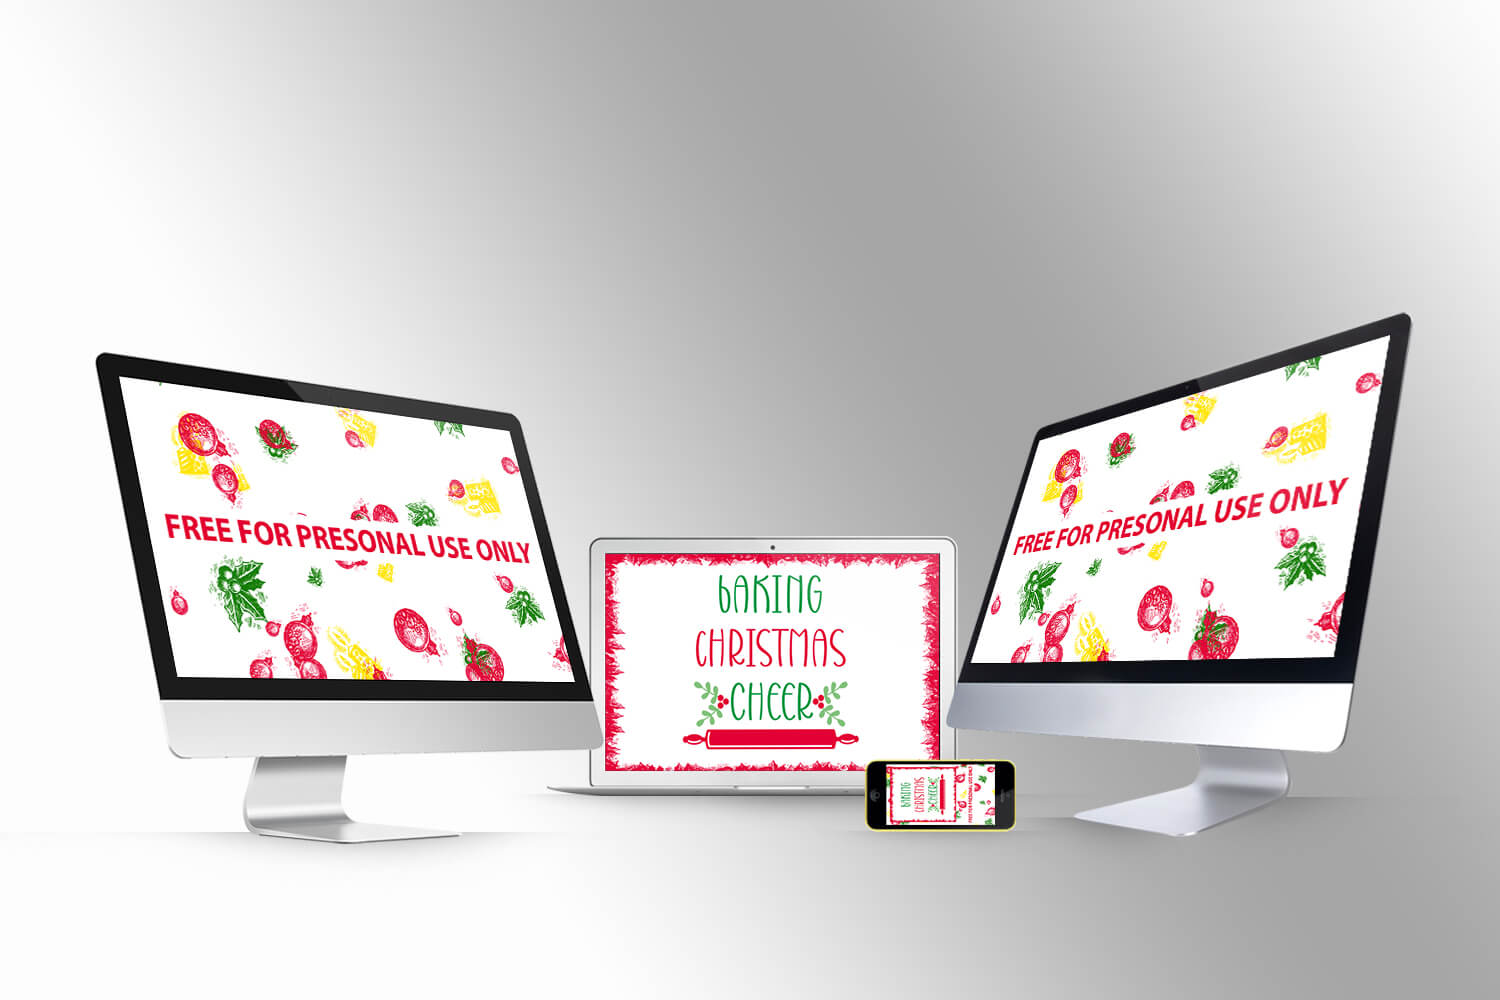 Quote baking Christmas cheer free SVG files facebook image.